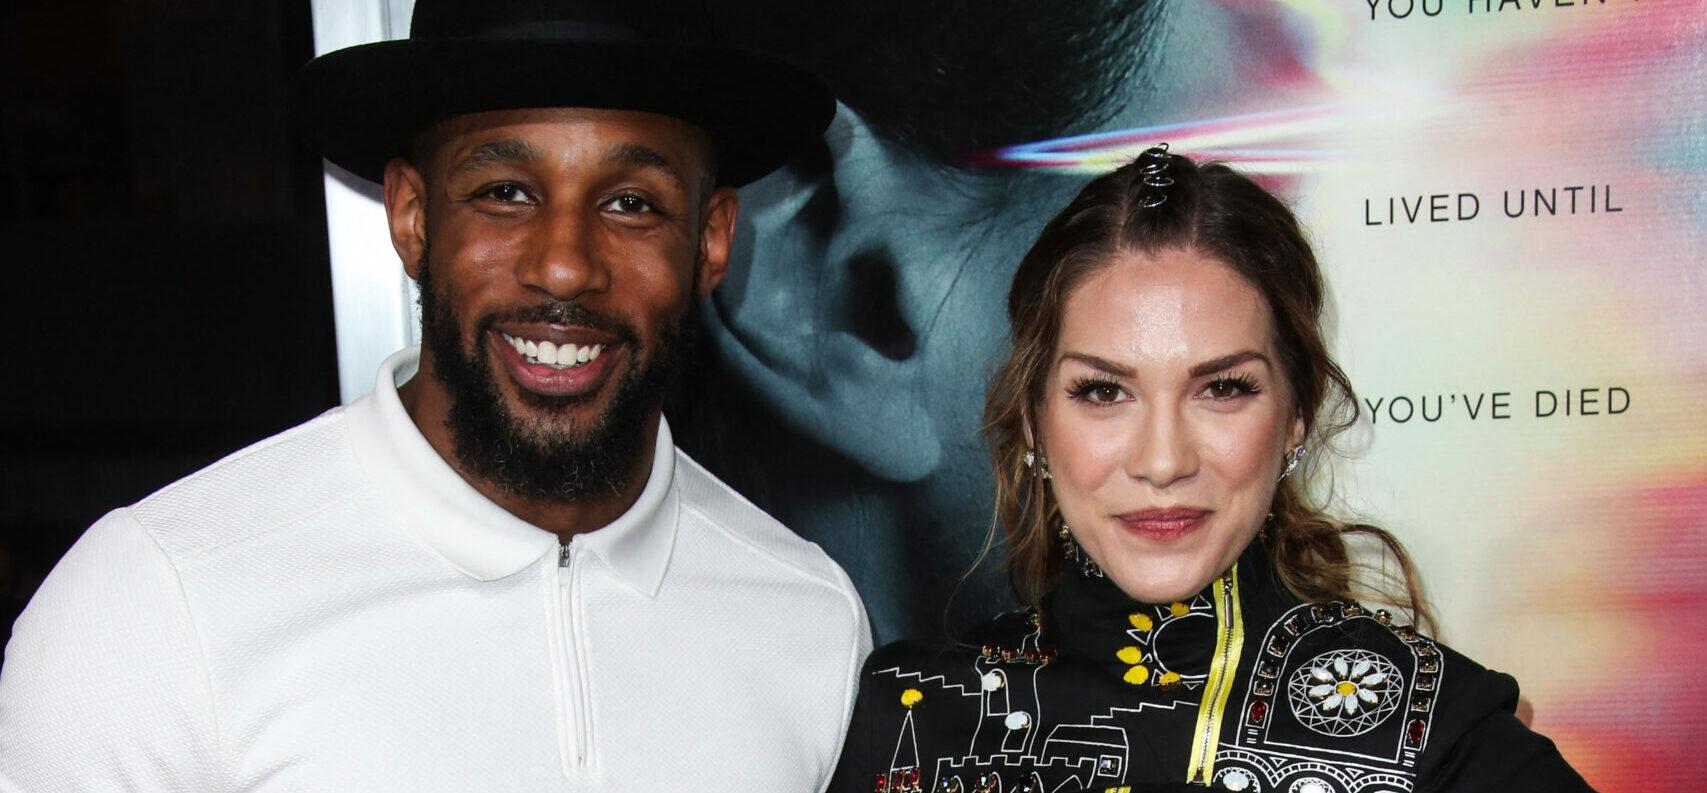 Allison Holker Claims There Were "No Arguments, Issues " Prior To tWitch's Death